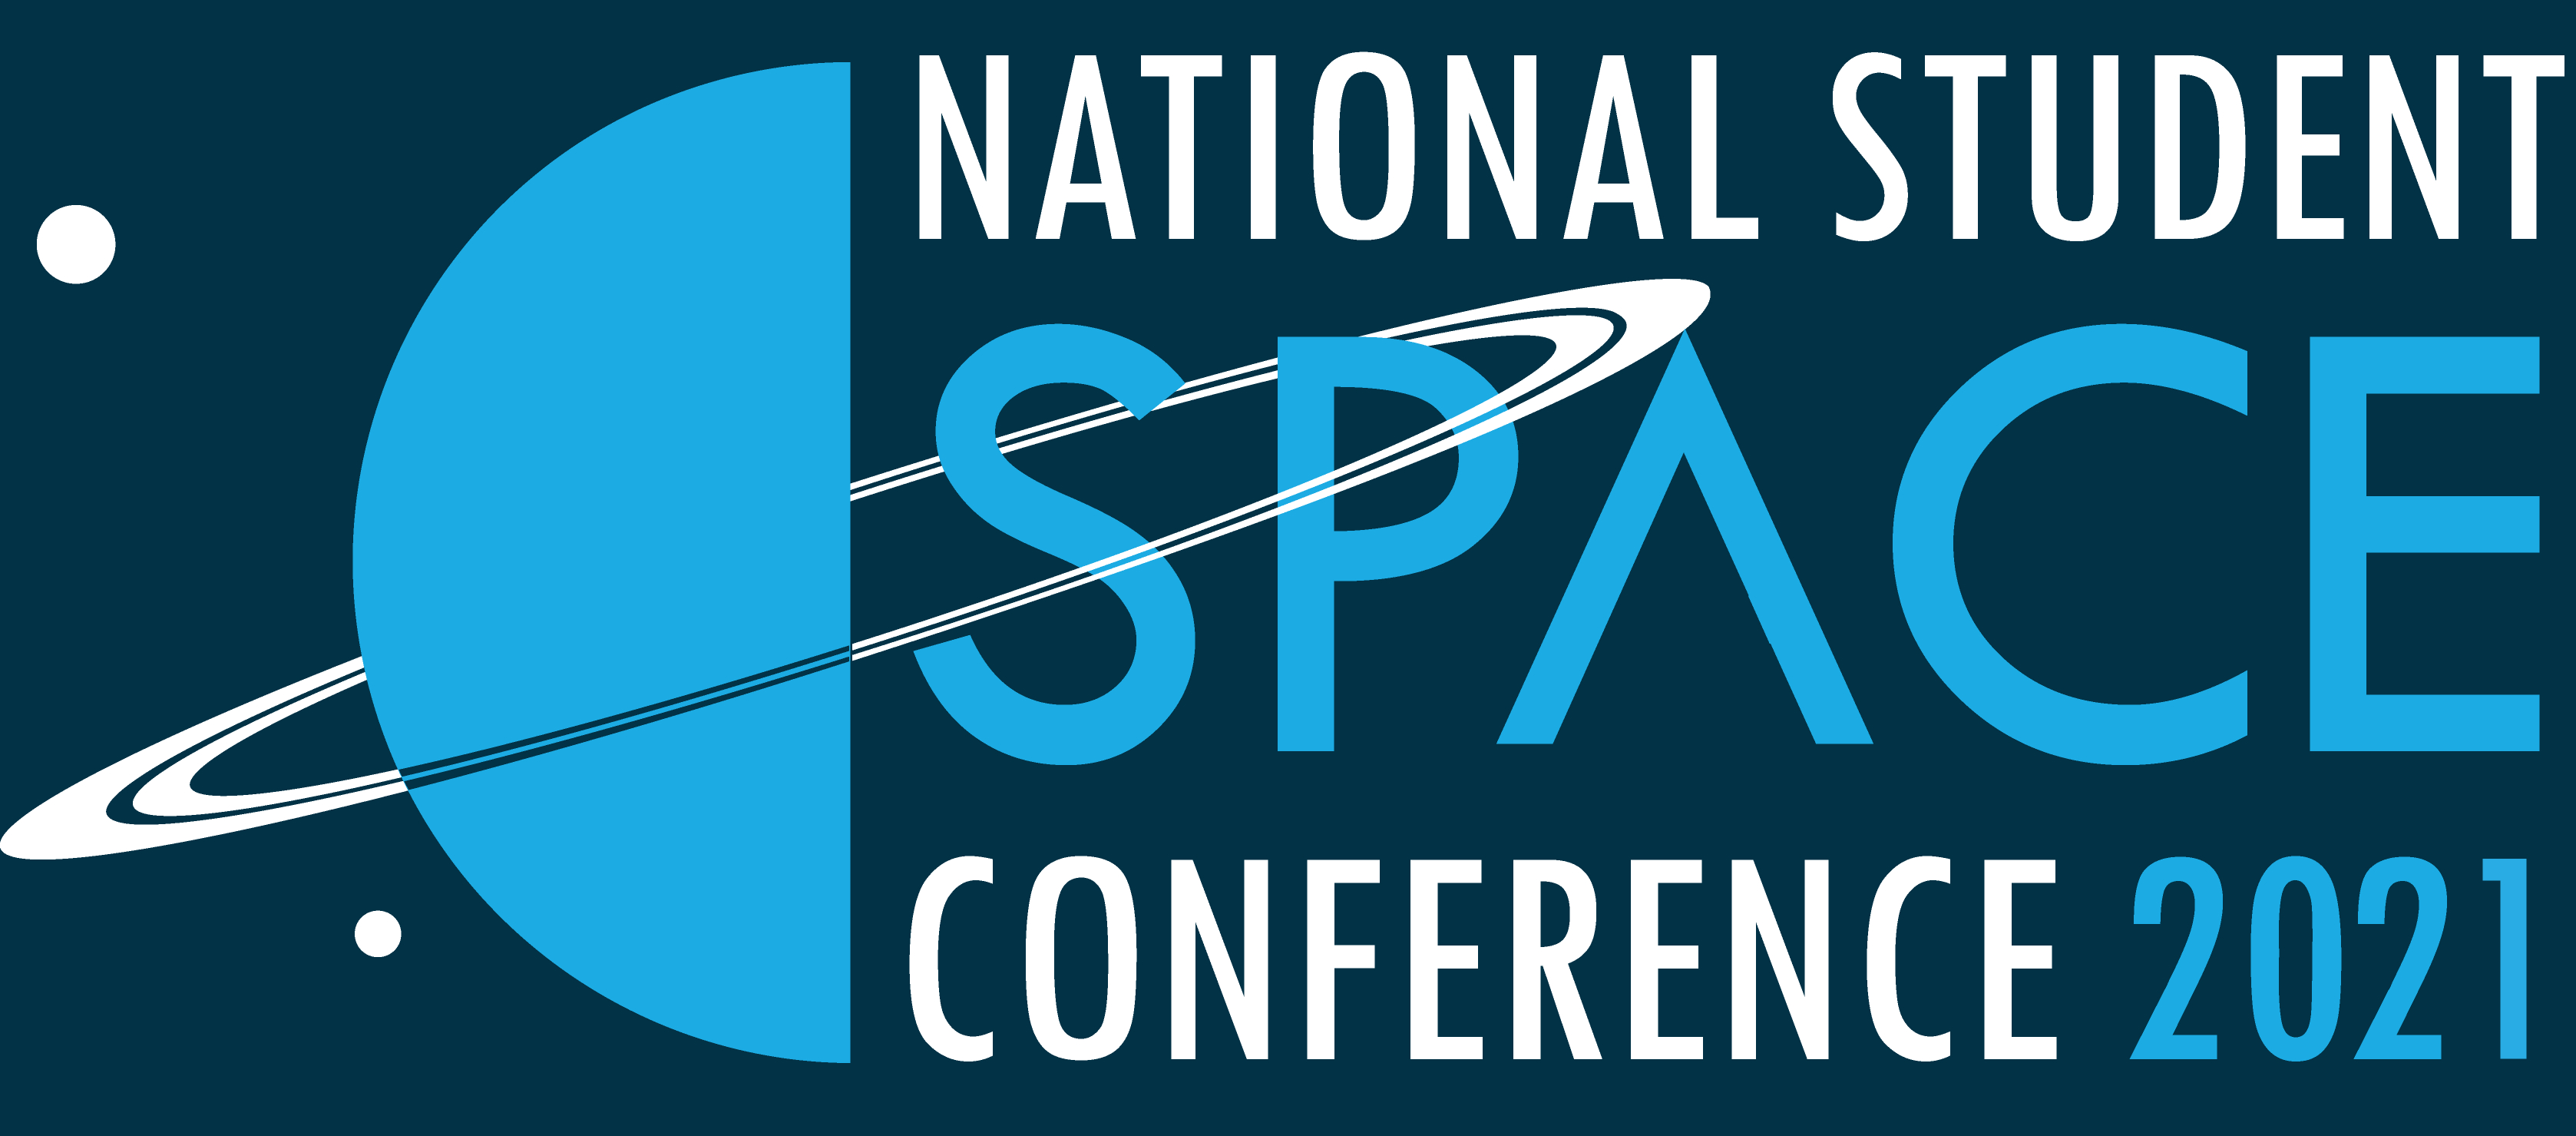 UKSEDS National Student Space Conference 2021 Spaceoneers.io